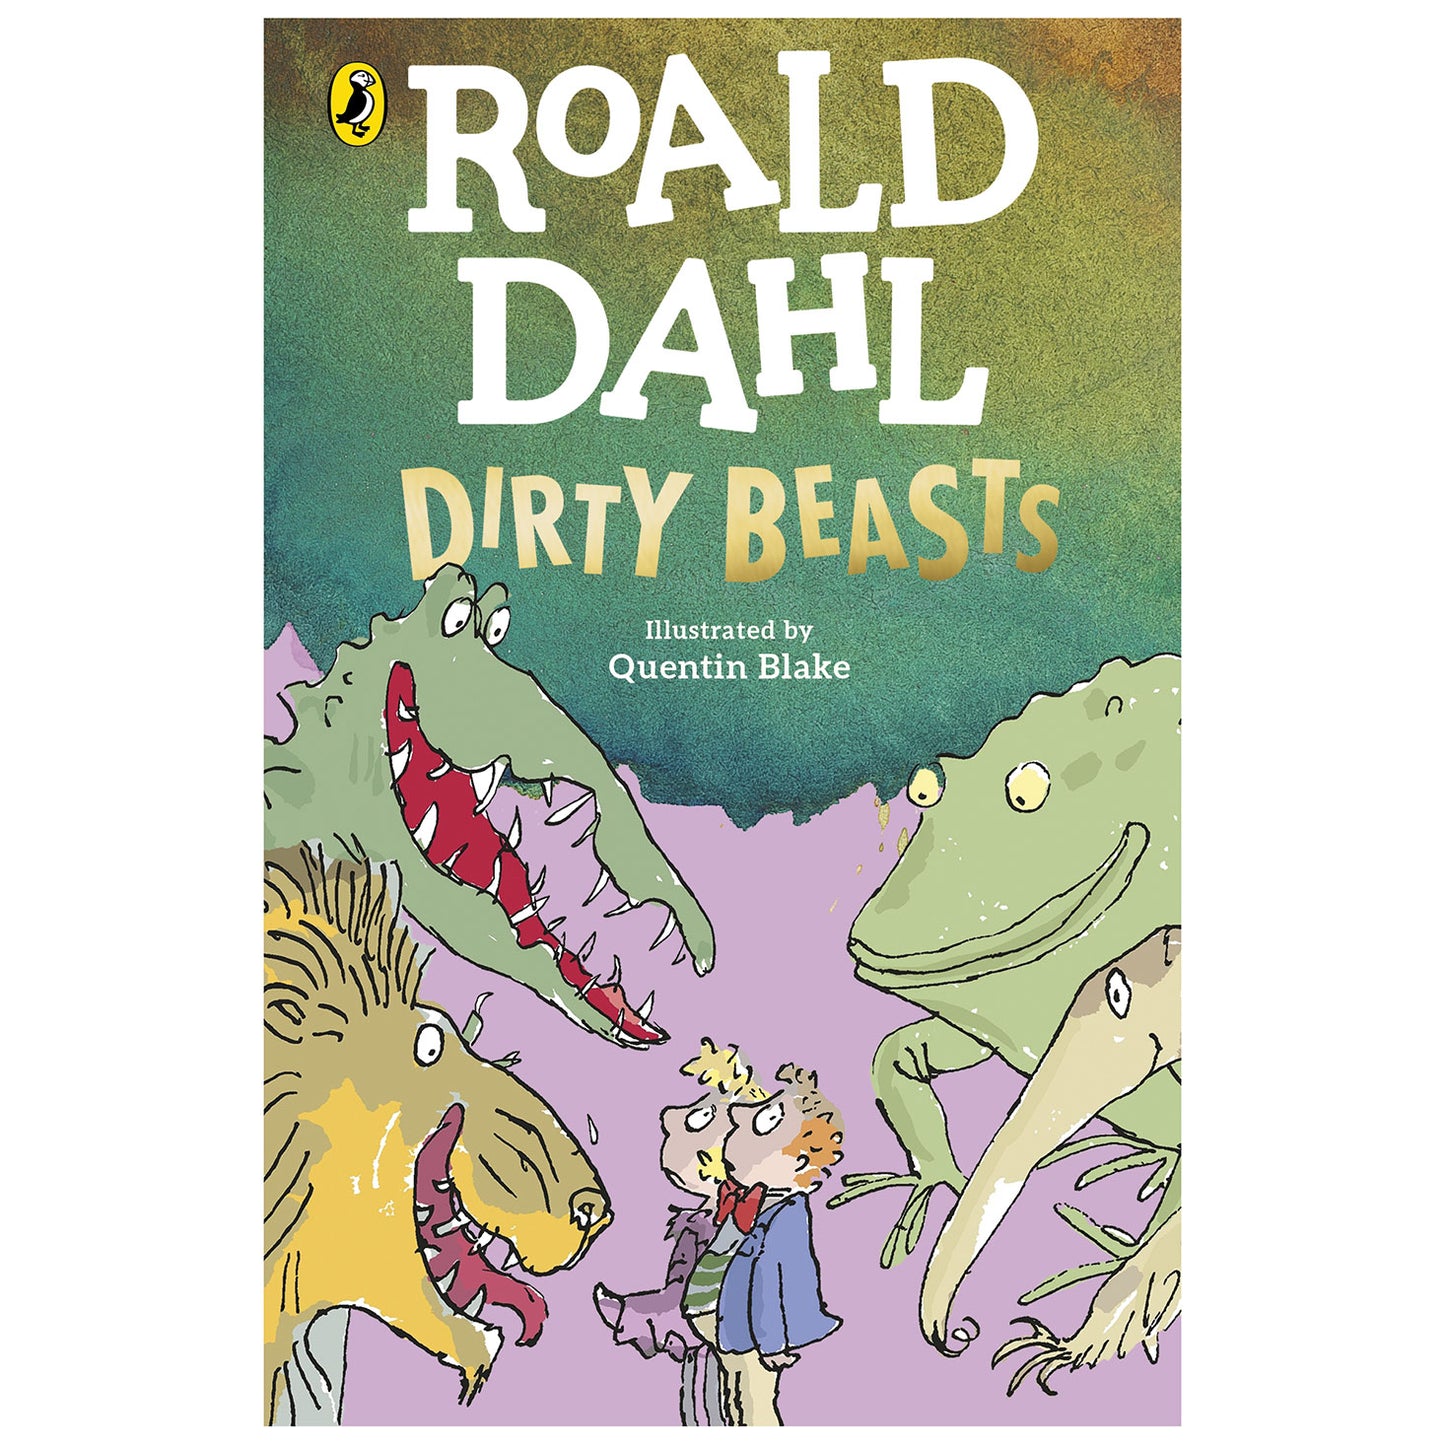 Dirty Beasts by Roald Dahl with illustrations by Quentin Blake